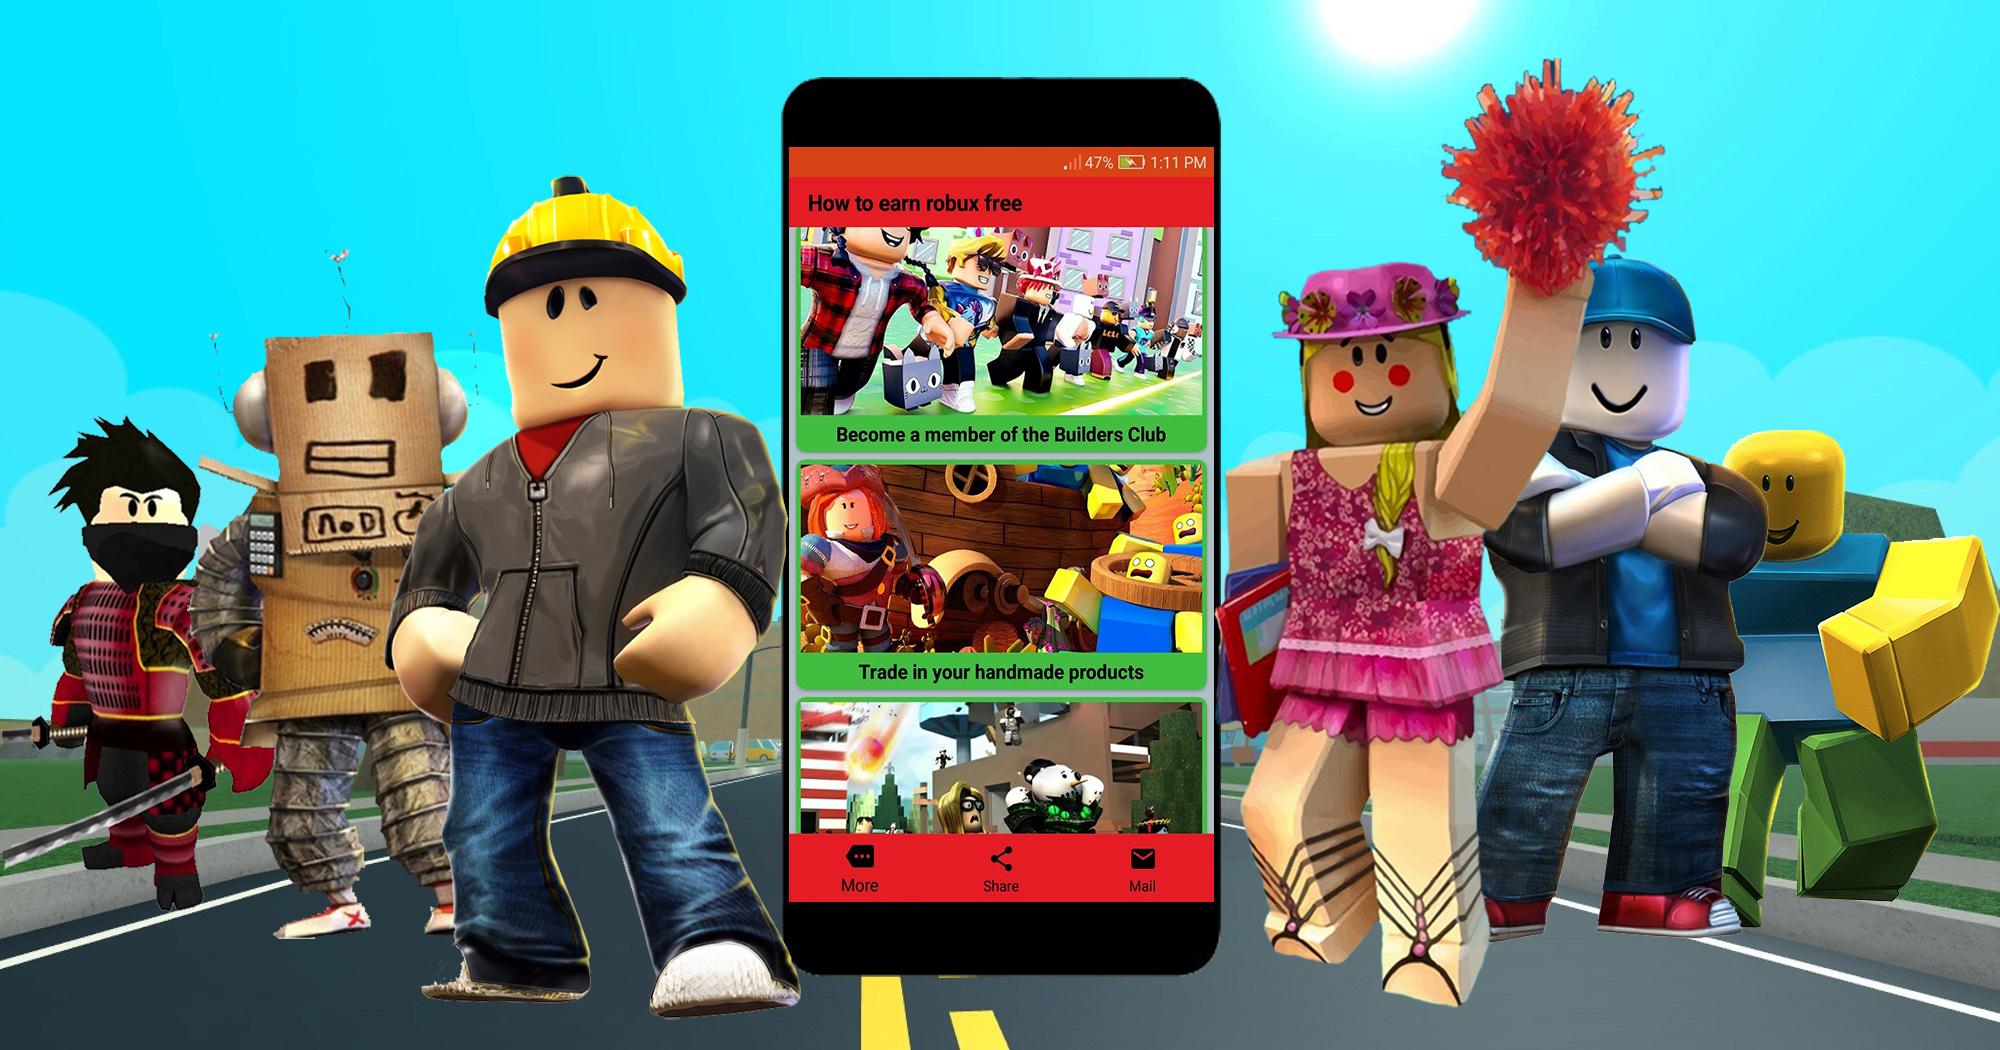 Baixe Robux For Roblox 1.0 para Android